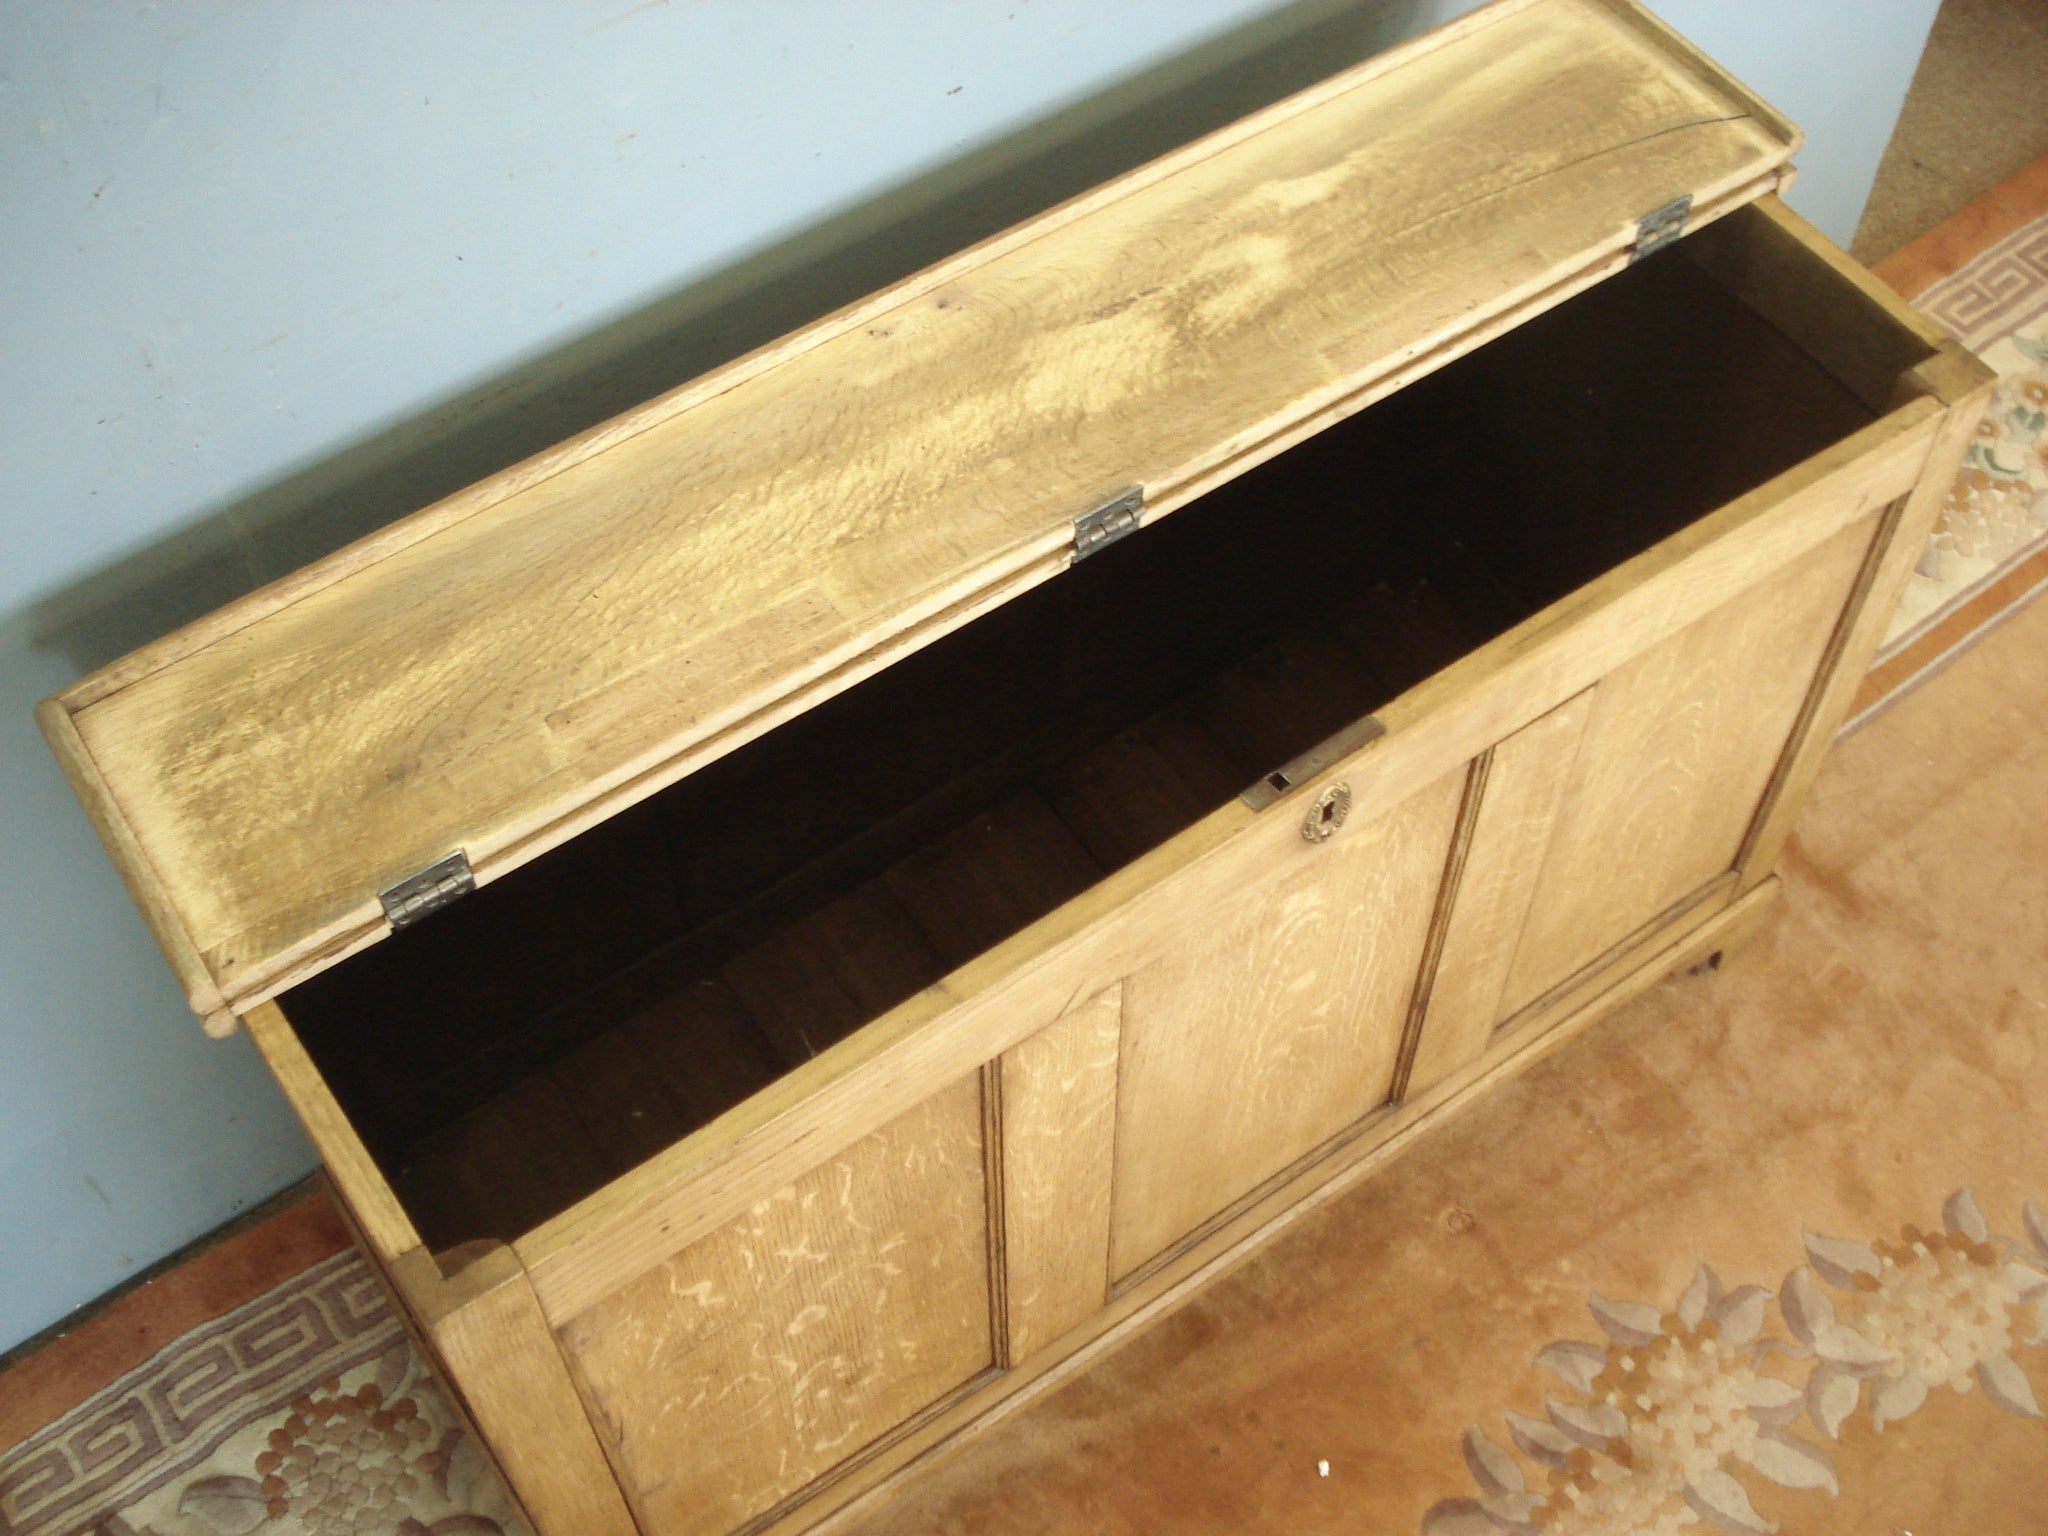 Panelled all around 19th Century Coffer with plain plank fold over lid